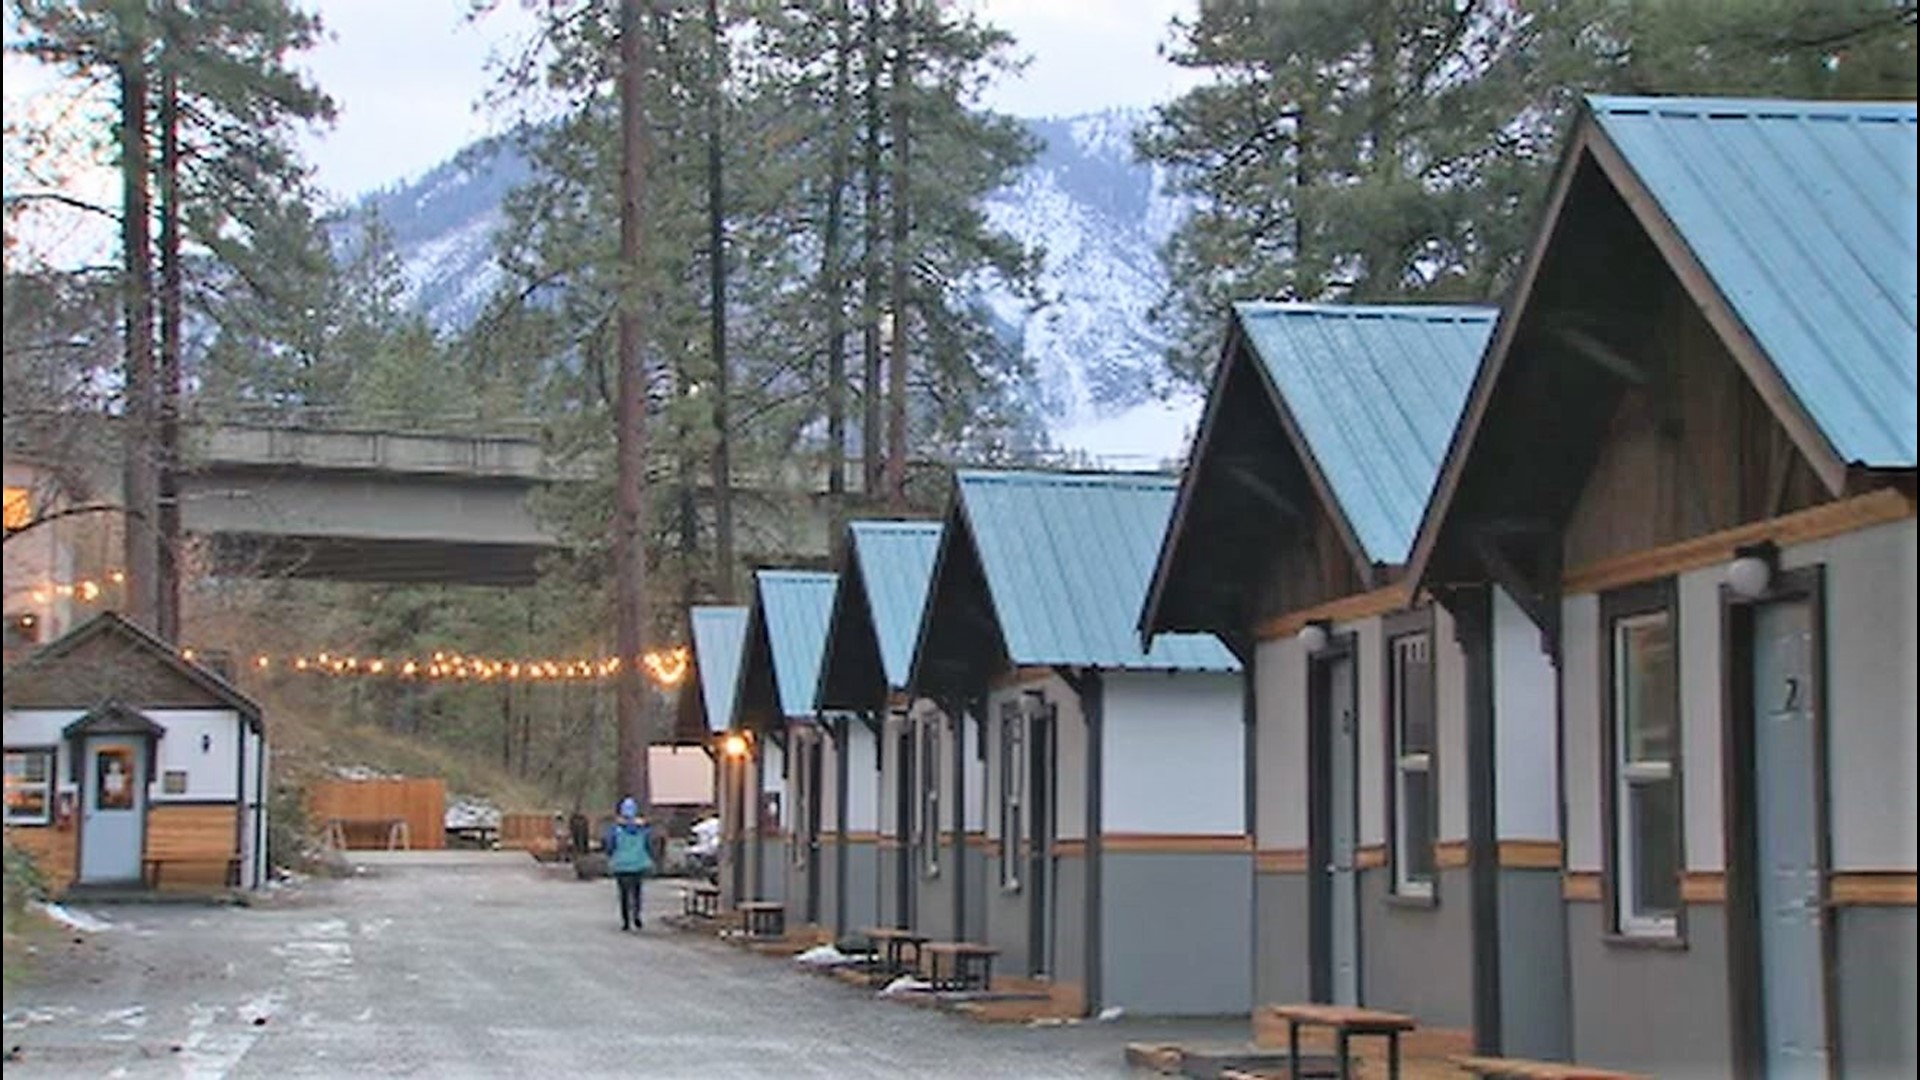 PNW-born Loge Camps has hospitality for recreation seekers dialed in, and now they're going national.